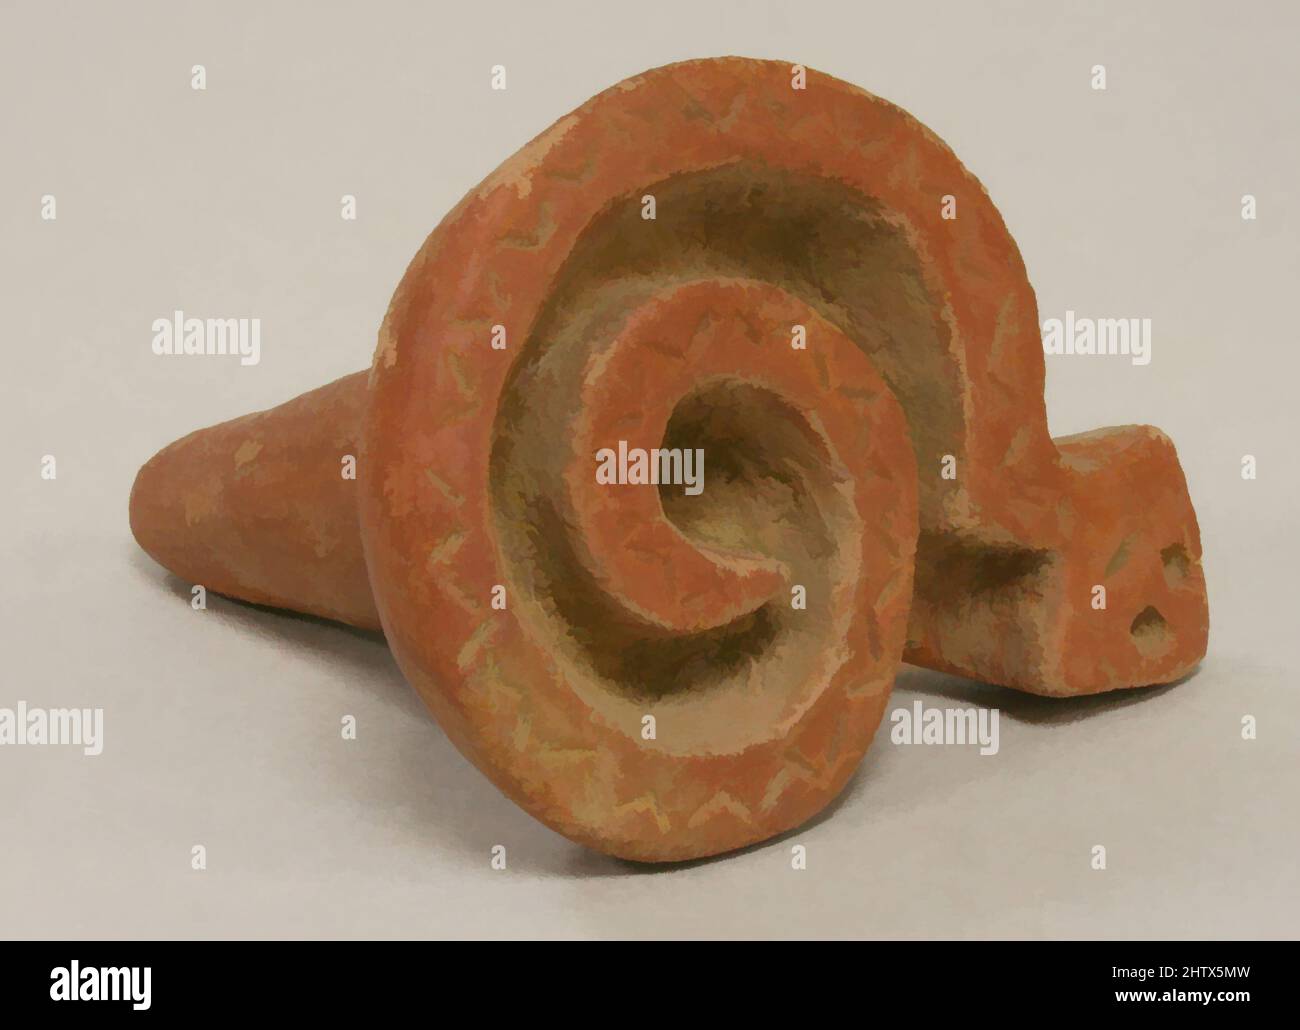 Art inspired by Serpent Stamp, 1st–7th century, Costa Rica, Atlantic Watershed, Ceramic, H. 2 1/16 x W. 2 1/8 in. (5.3 x 5.4 cm), Ceramics-Implements, Ceramic stamps are found in Costa Rican burials, suggesting that their importance extended beyond utilitarian. Much speculation has, Classic works modernized by Artotop with a splash of modernity. Shapes, color and value, eye-catching visual impact on art. Emotions through freedom of artworks in a contemporary way. A timeless message pursuing a wildly creative new direction. Artists turning to the digital medium and creating the Artotop NFT Stock Photo